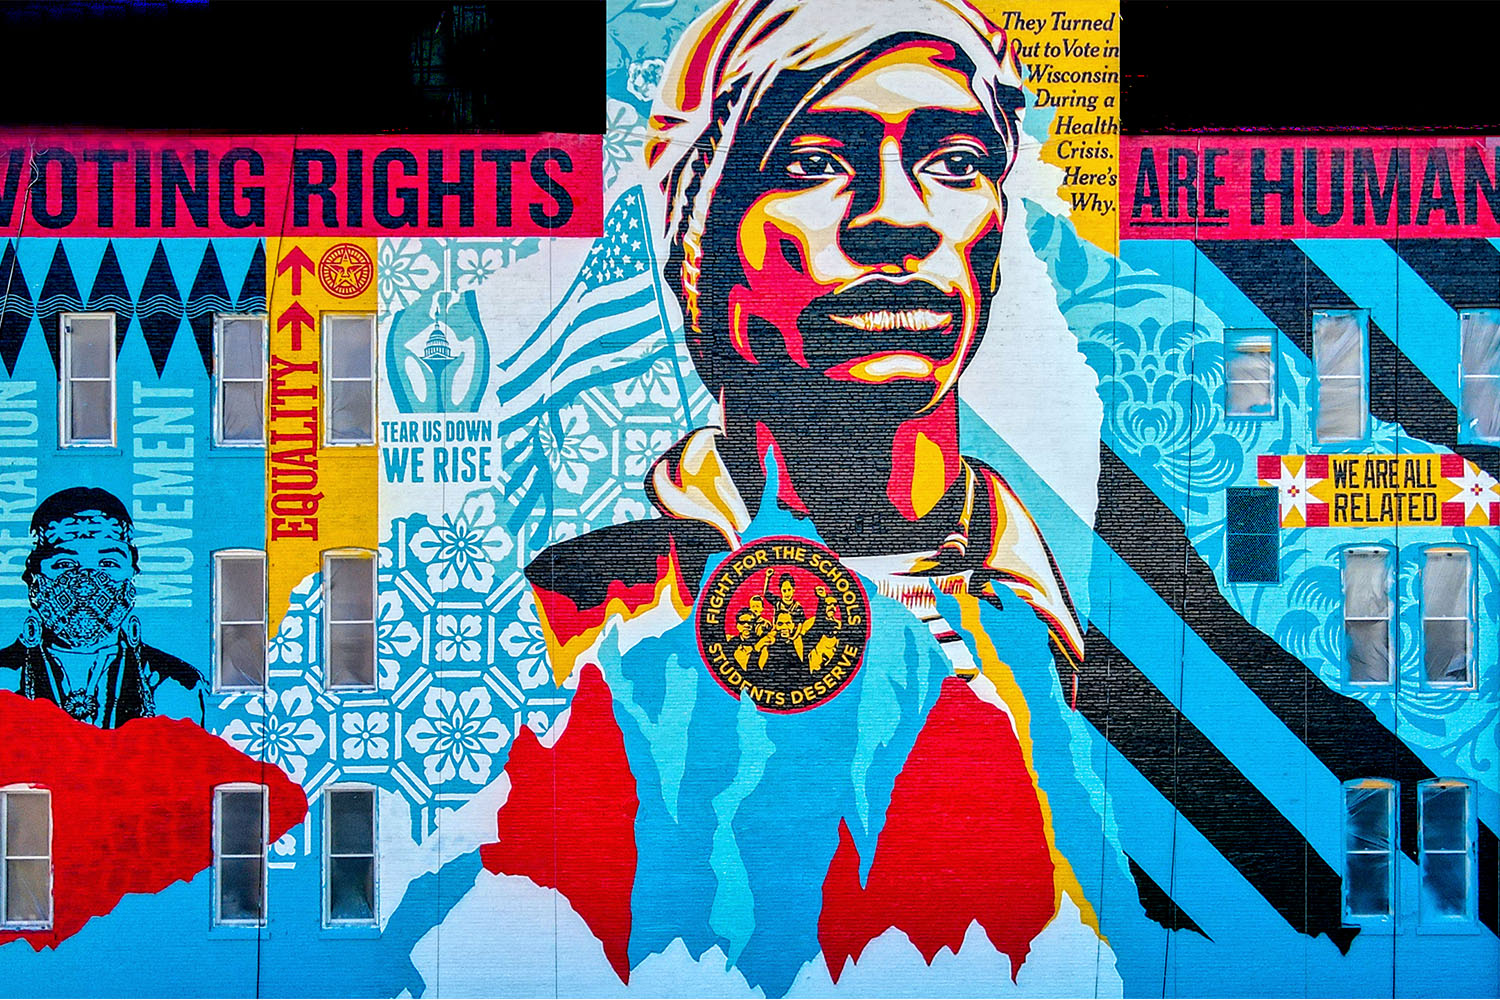 Shepard Fairey's mural "Voting Rights Are Human Rights" in Milwaukee, Wisconsin